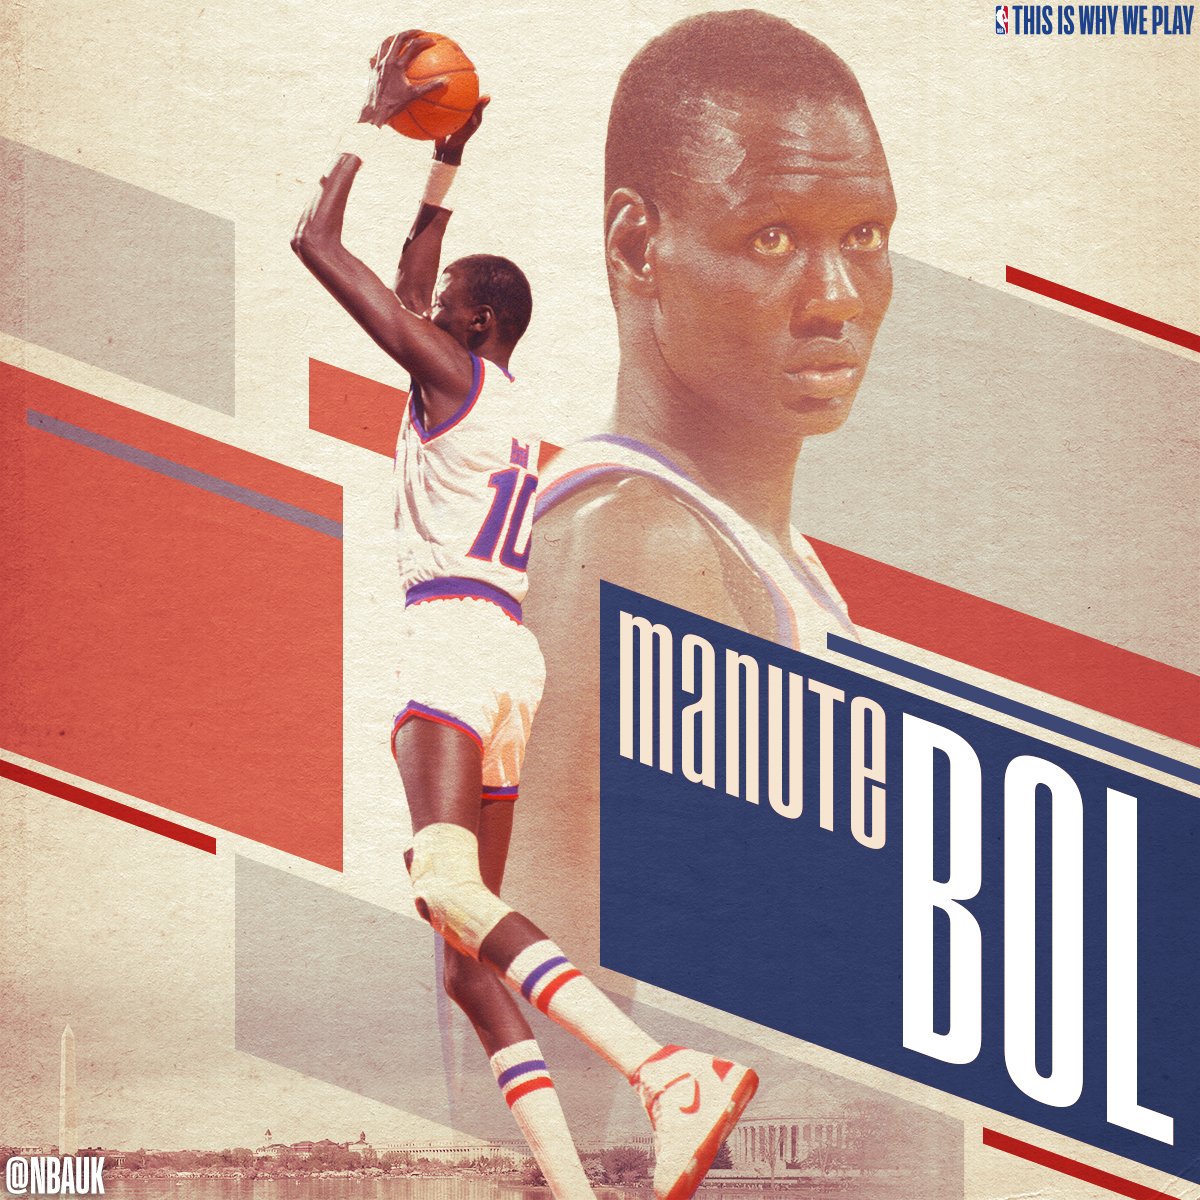 Wishing a very Happy Birthday to one of the tallest players in NBA history, the 7\7\" Manute Bol 